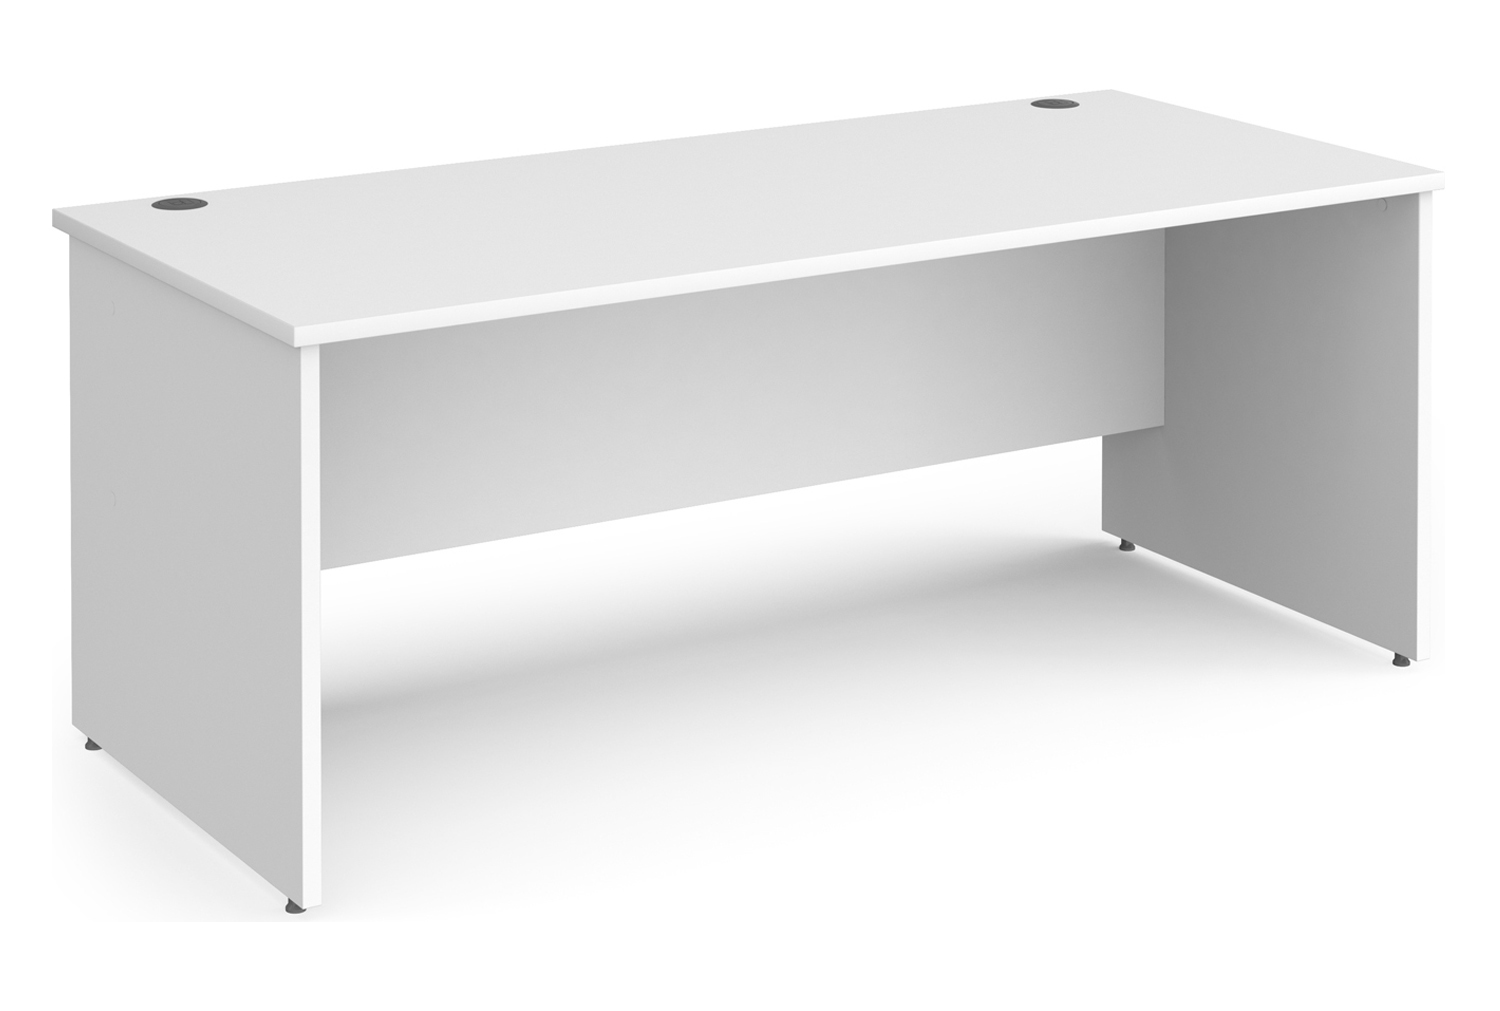 Value Line Classic+ Rectangular Panel End Office Desk, 180wx80dx73h (cm), White, Express Delivery